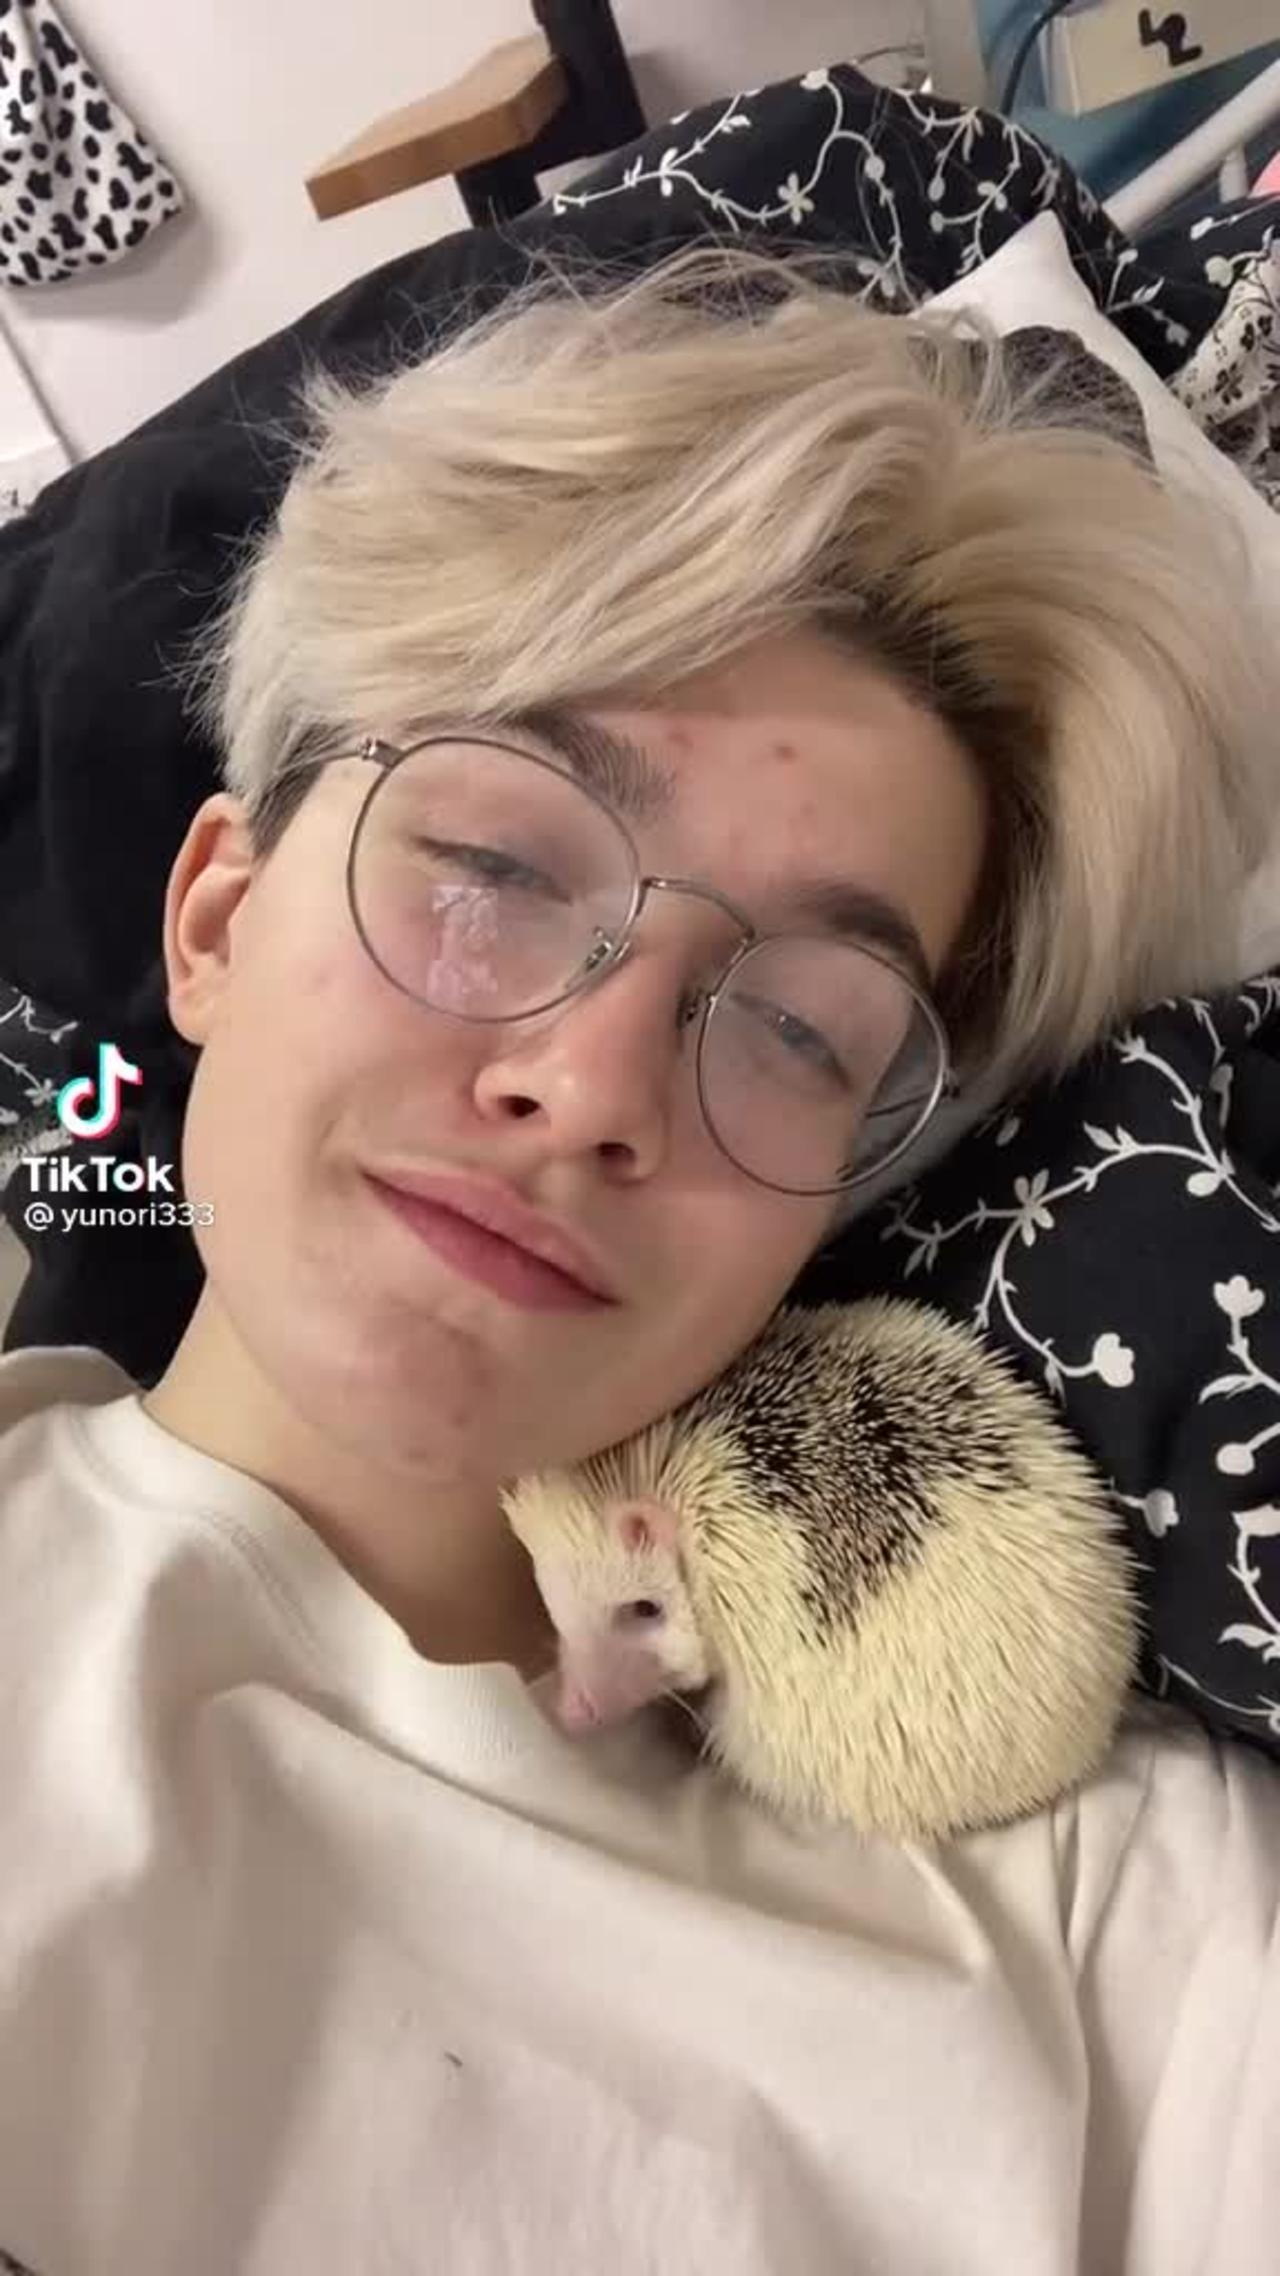 chilling with my hedgehog pet